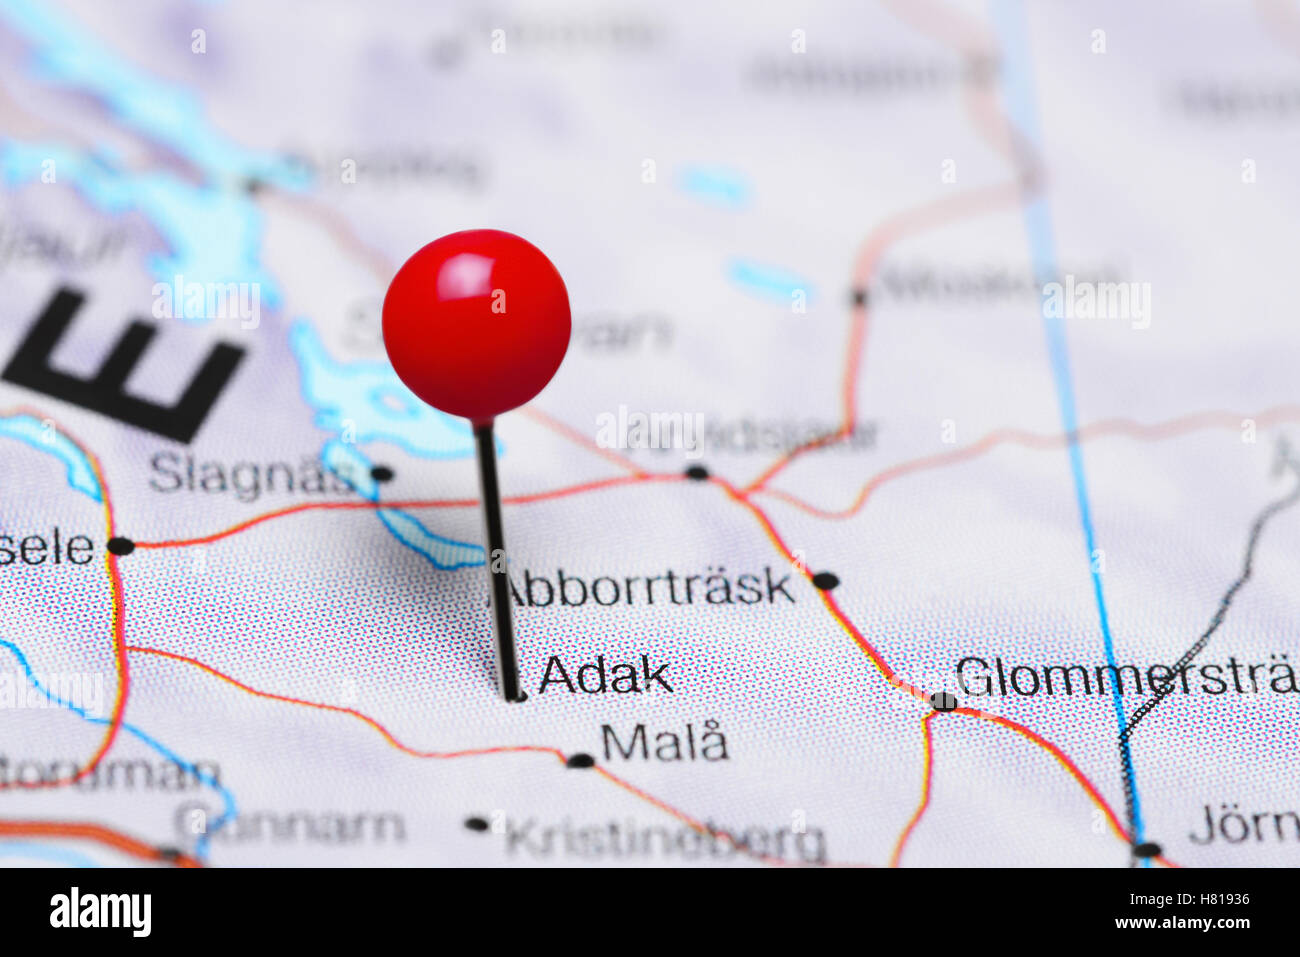 Adak pinned on a map of Sweden Stock Photo